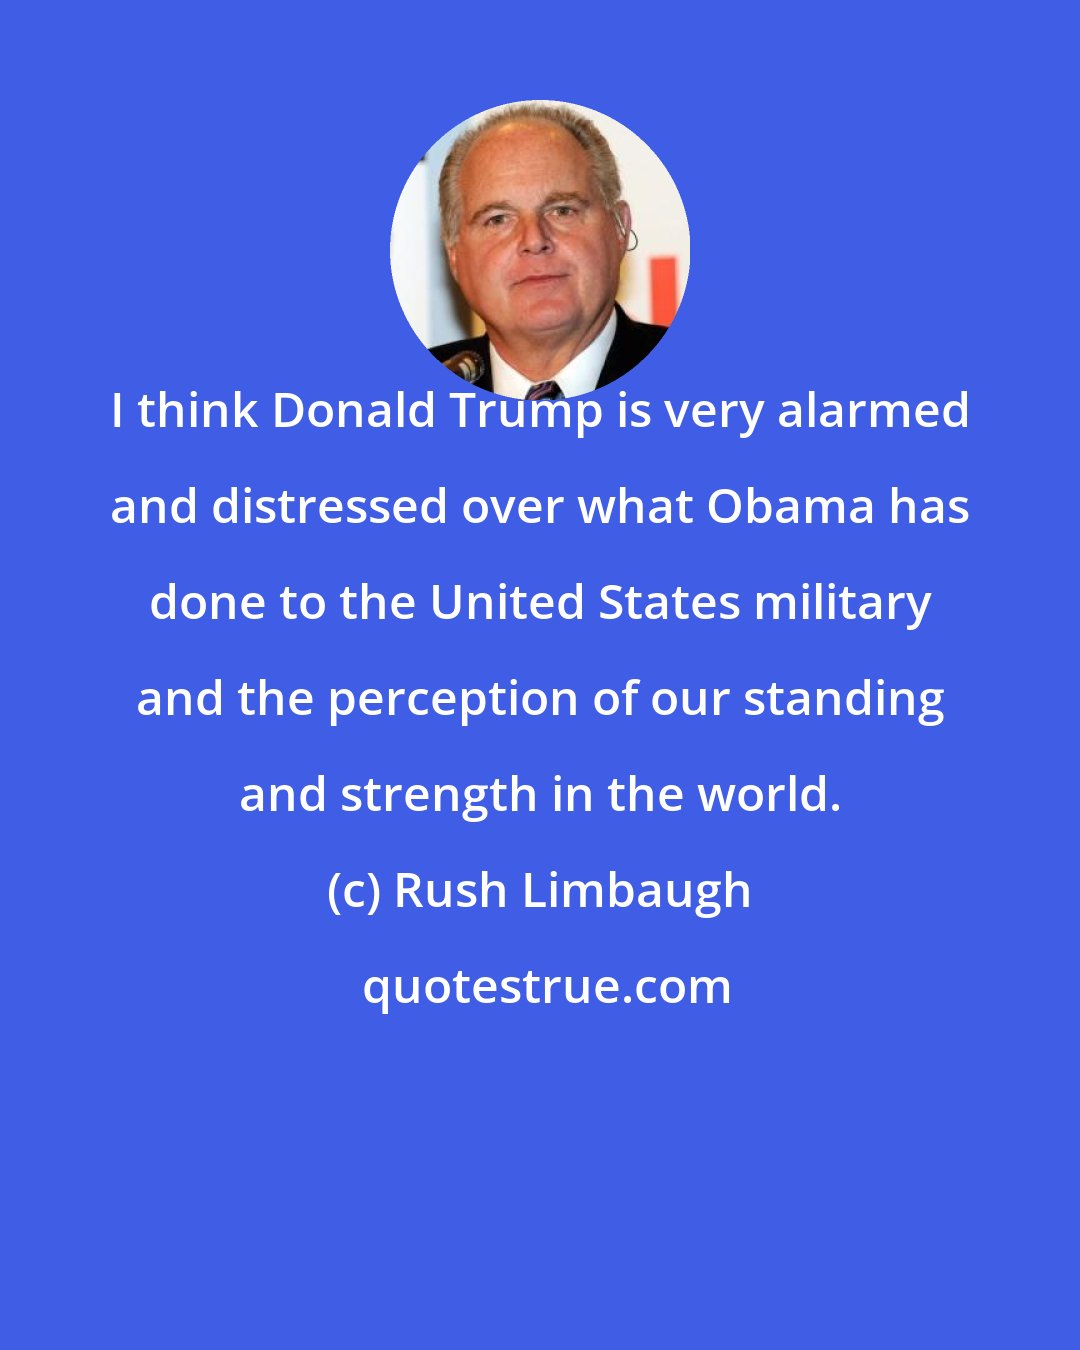 Rush Limbaugh: I think Donald Trump is very alarmed and distressed over what Obama has done to the United States military and the perception of our standing and strength in the world.